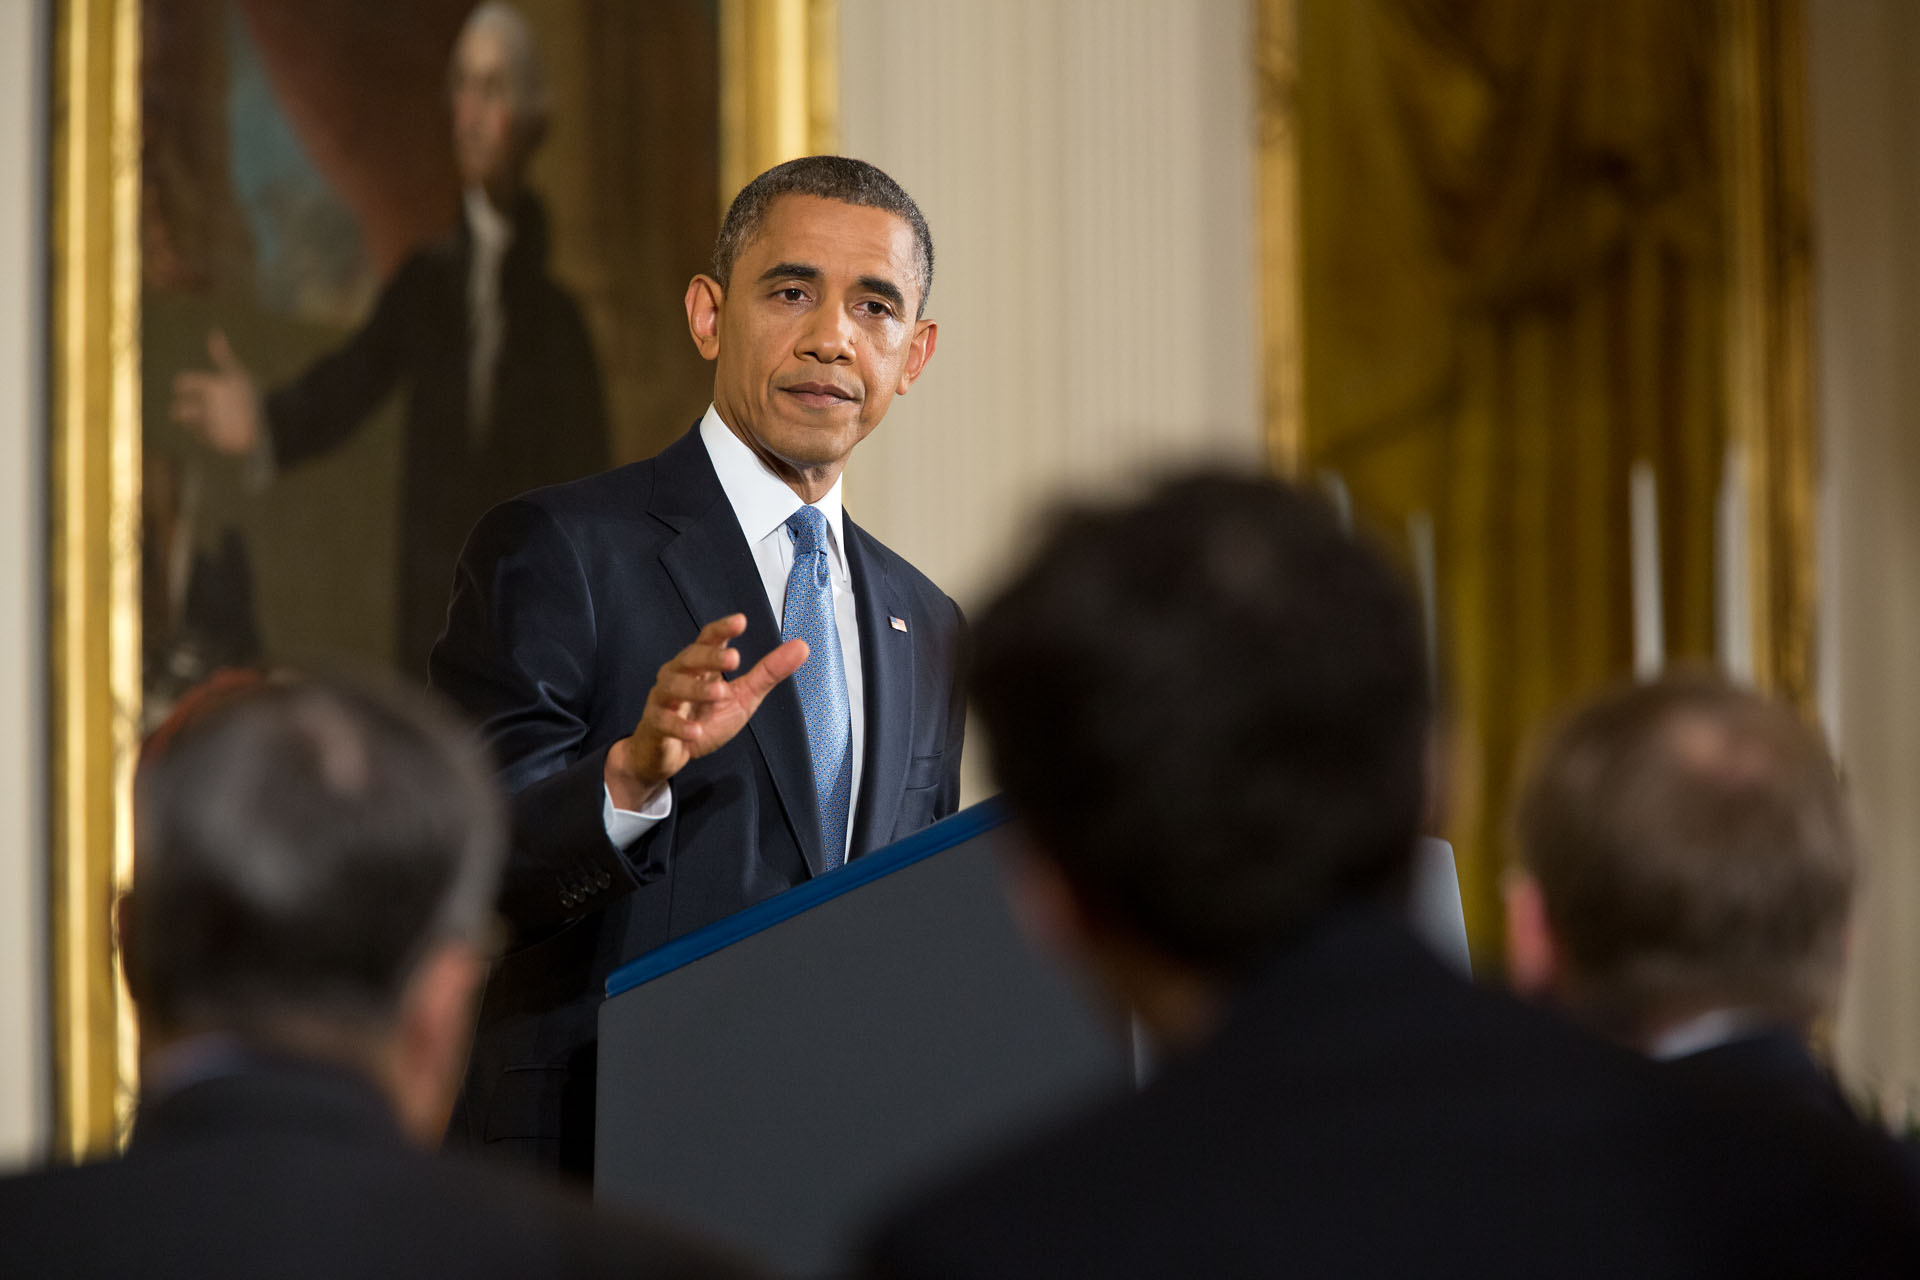 President Barack Obama gives a press conference in the East Room of the White House